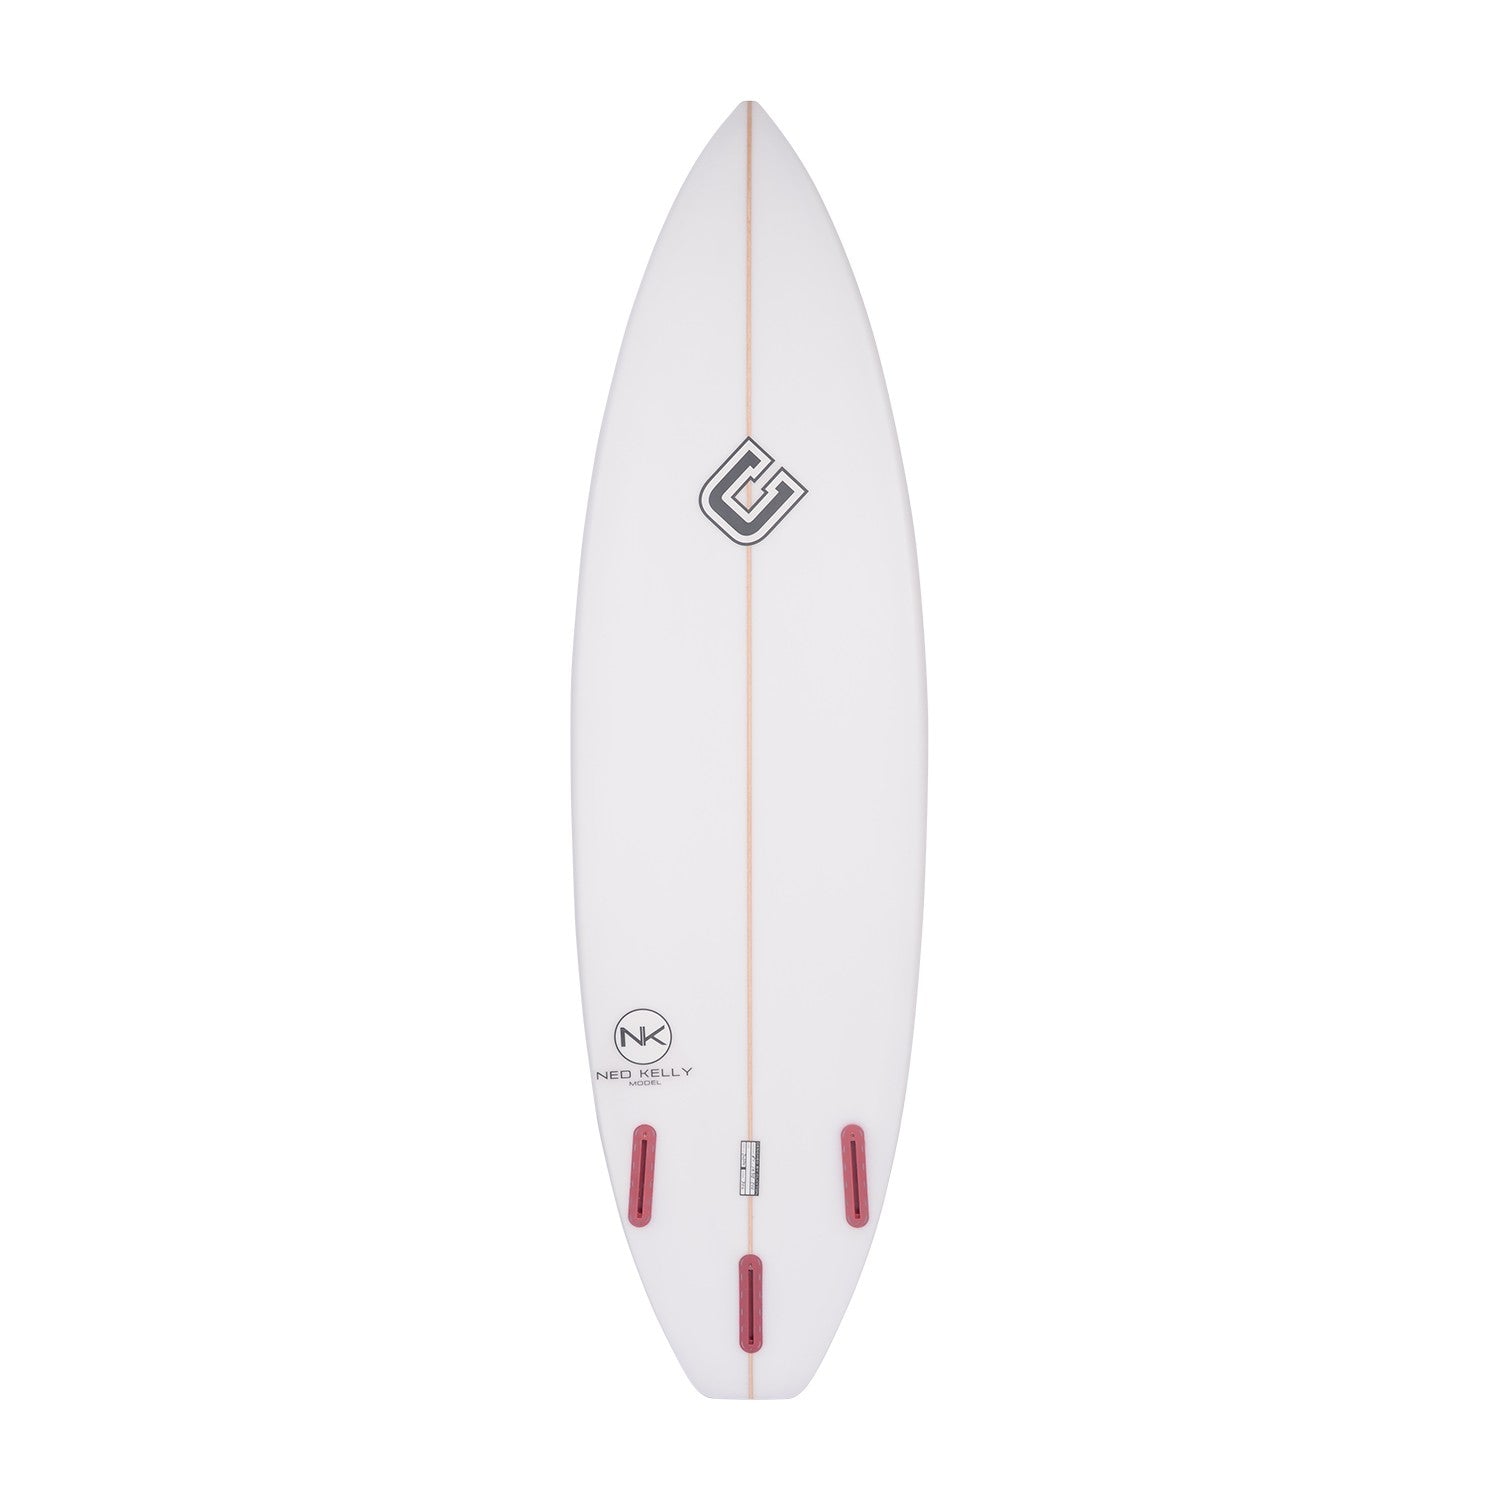 CLAYTON Surfboards - Ned Kelly (PU) Futures - 6'0